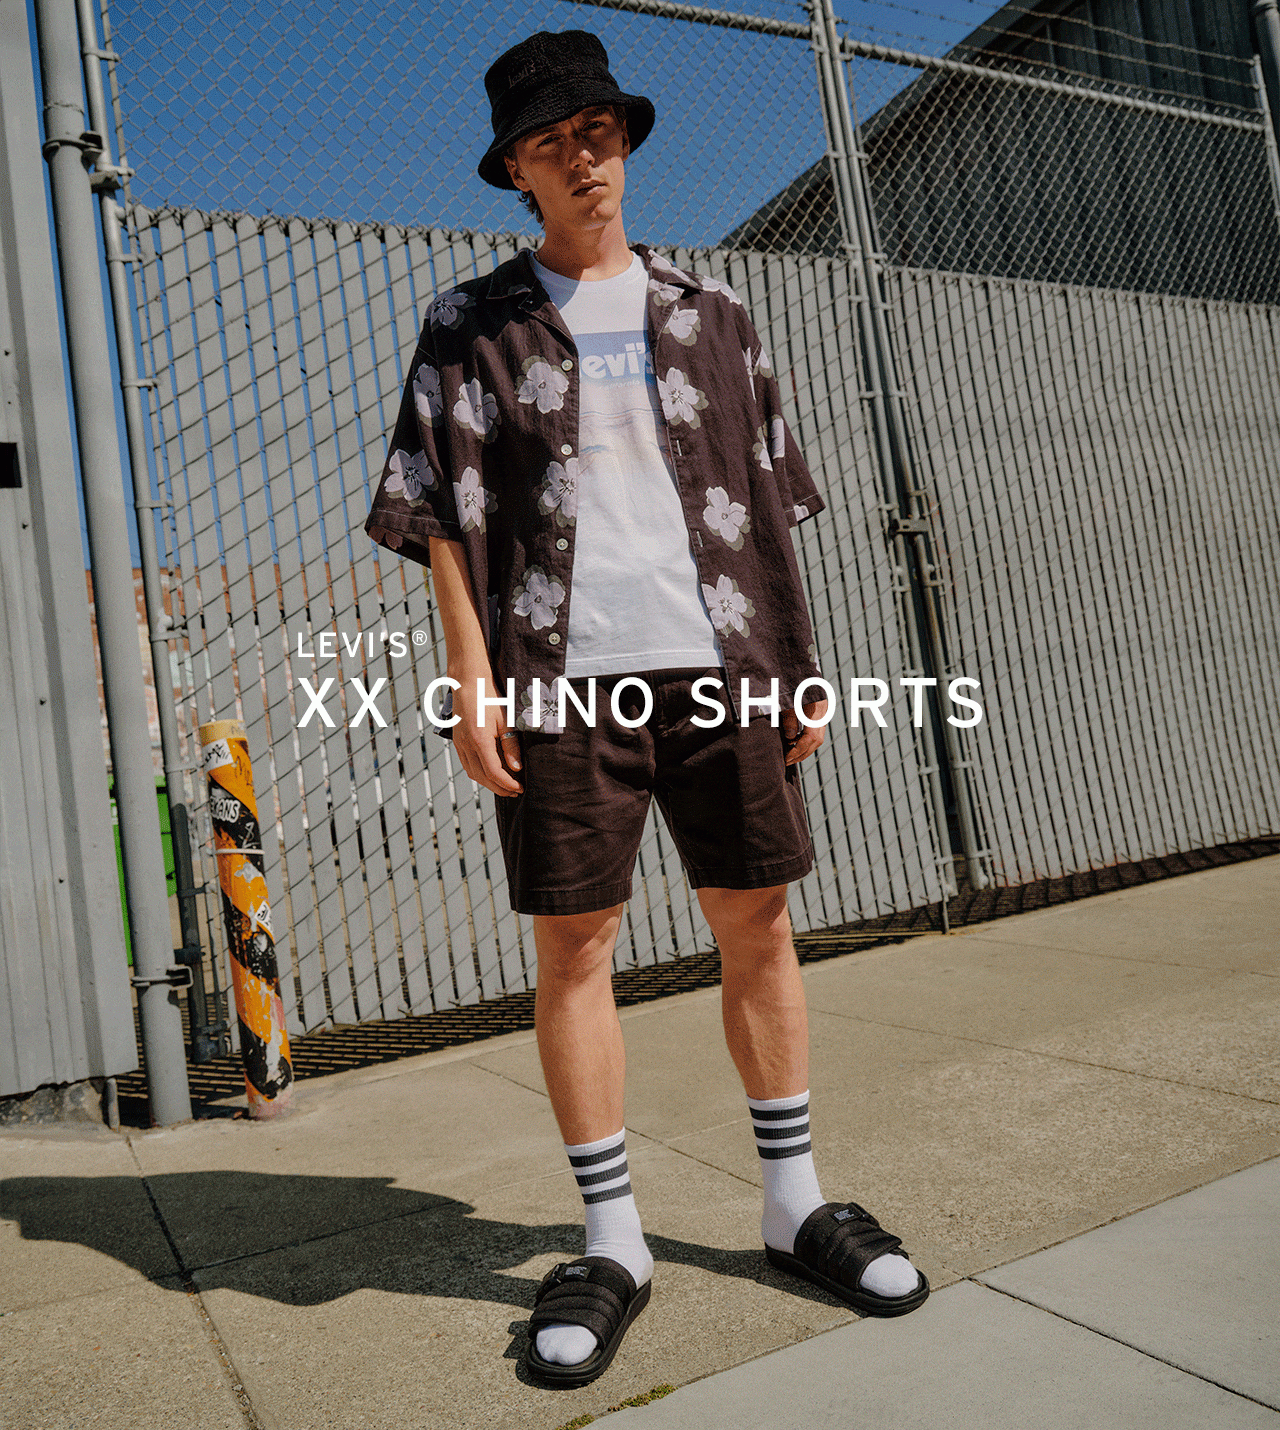 THE LEVI'S® XX CHINO SHORTS: SHOP NOW